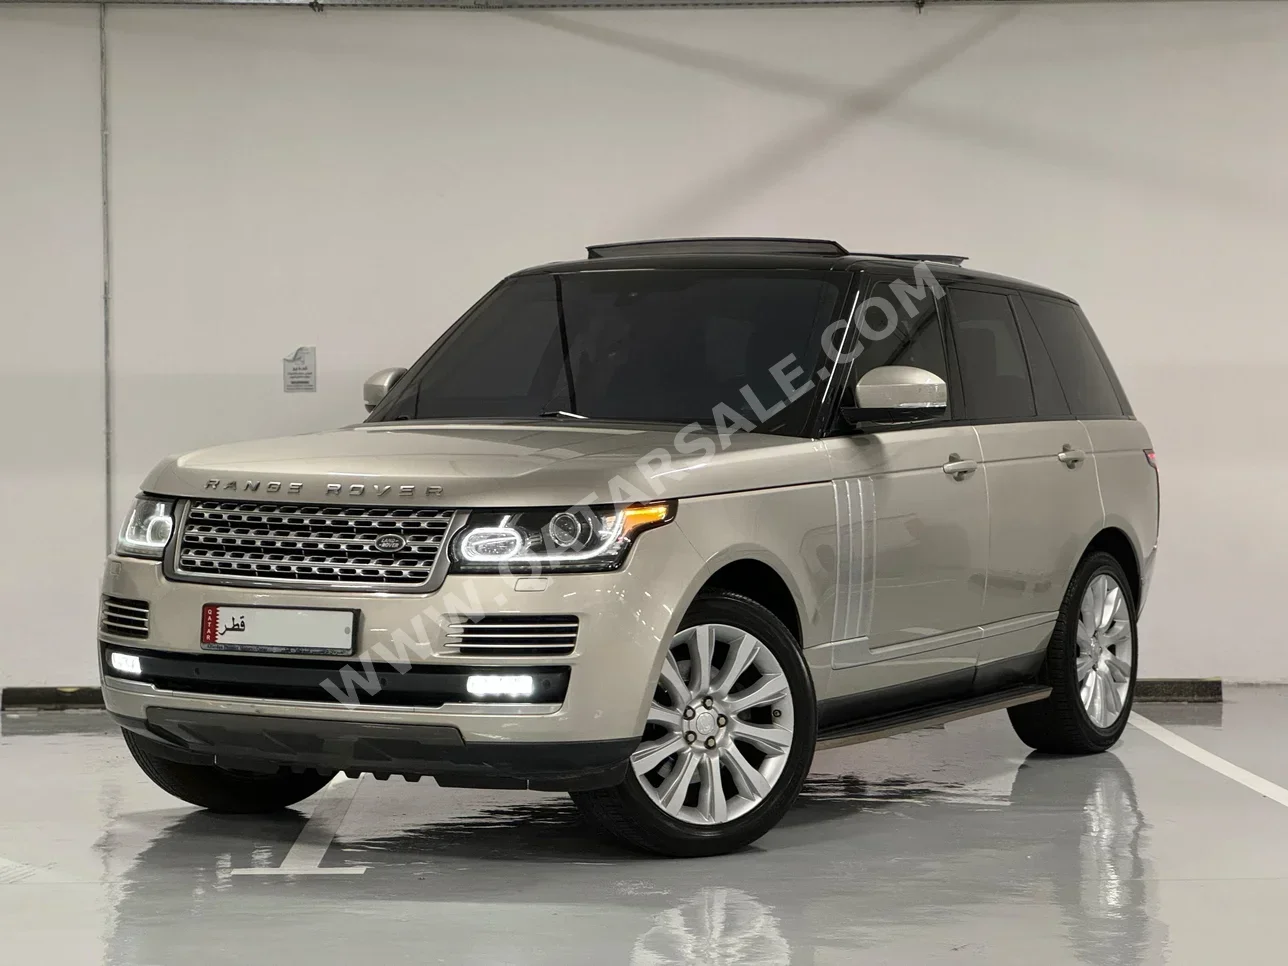 Land Rover  Range Rover  Vogue  2016  Automatic  129,000 Km  8 Cylinder  Four Wheel Drive (4WD)  SUV  Gold